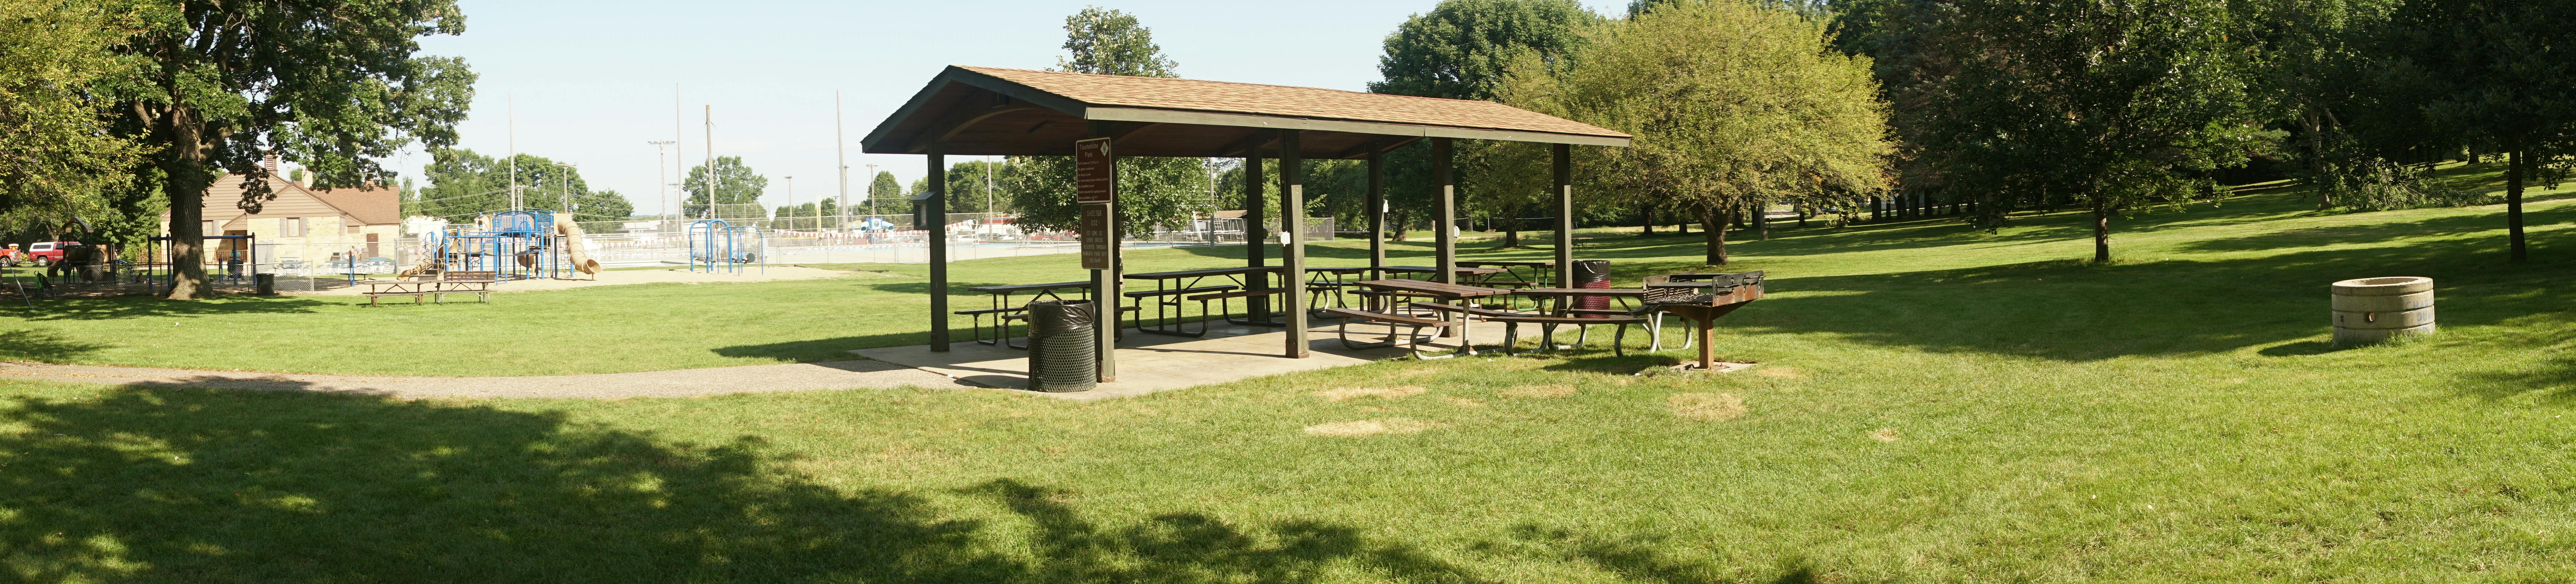 Tourtellotte Park shelter with pool and play system in the background.